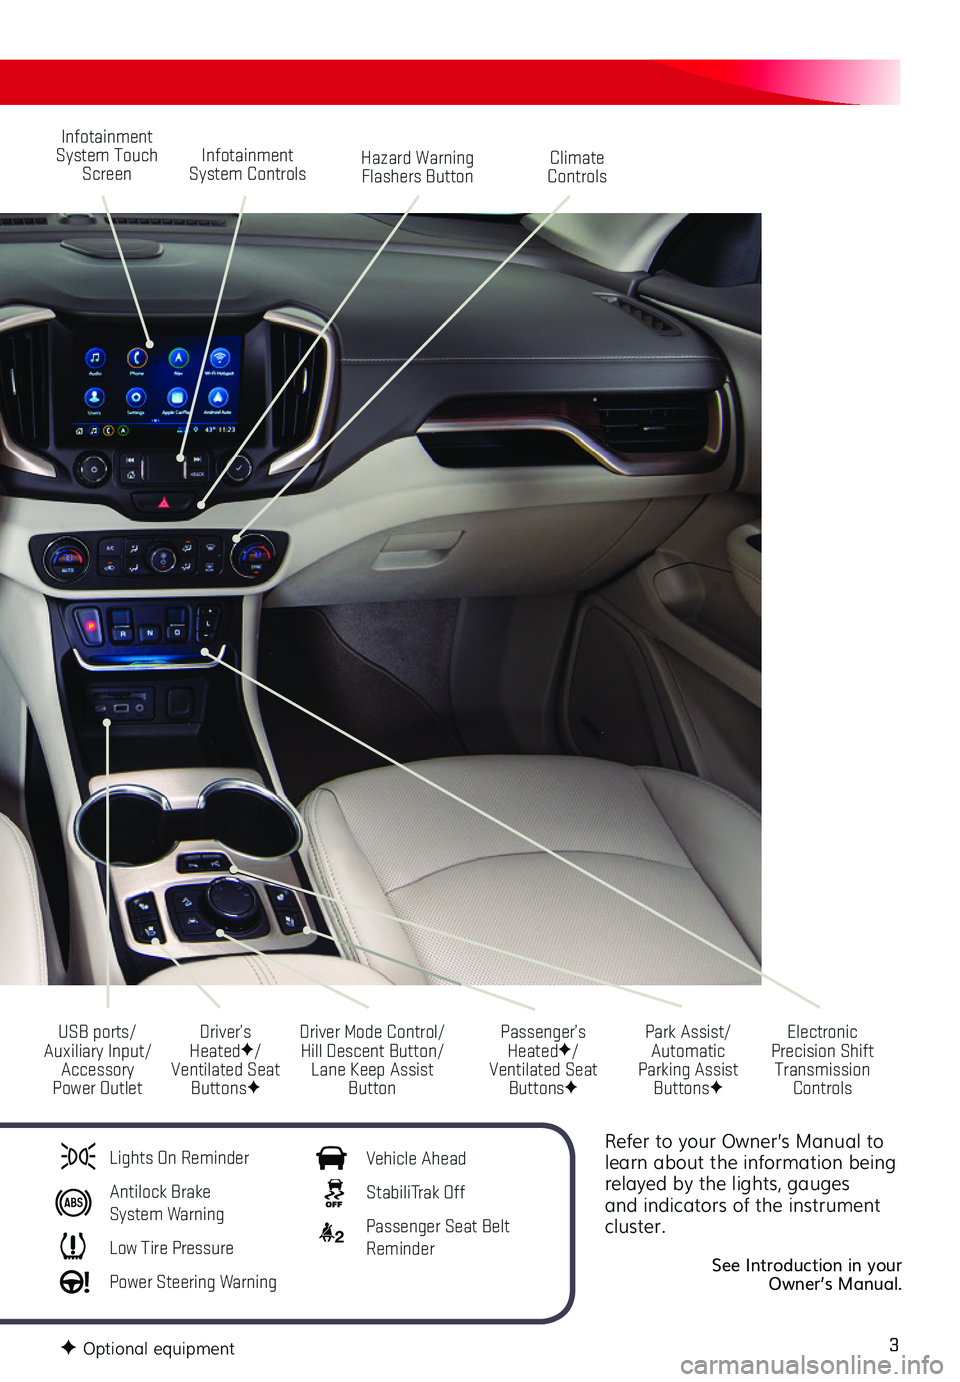 GMC TERRAIN 2020  Get To Know Guide 3
Refer to your Owner’s Manual to learn about the information being relayed by the lights, gauges and indicators of the instrument cluster.
See Introduction in your  Owner’s Manual.
Infotainment S